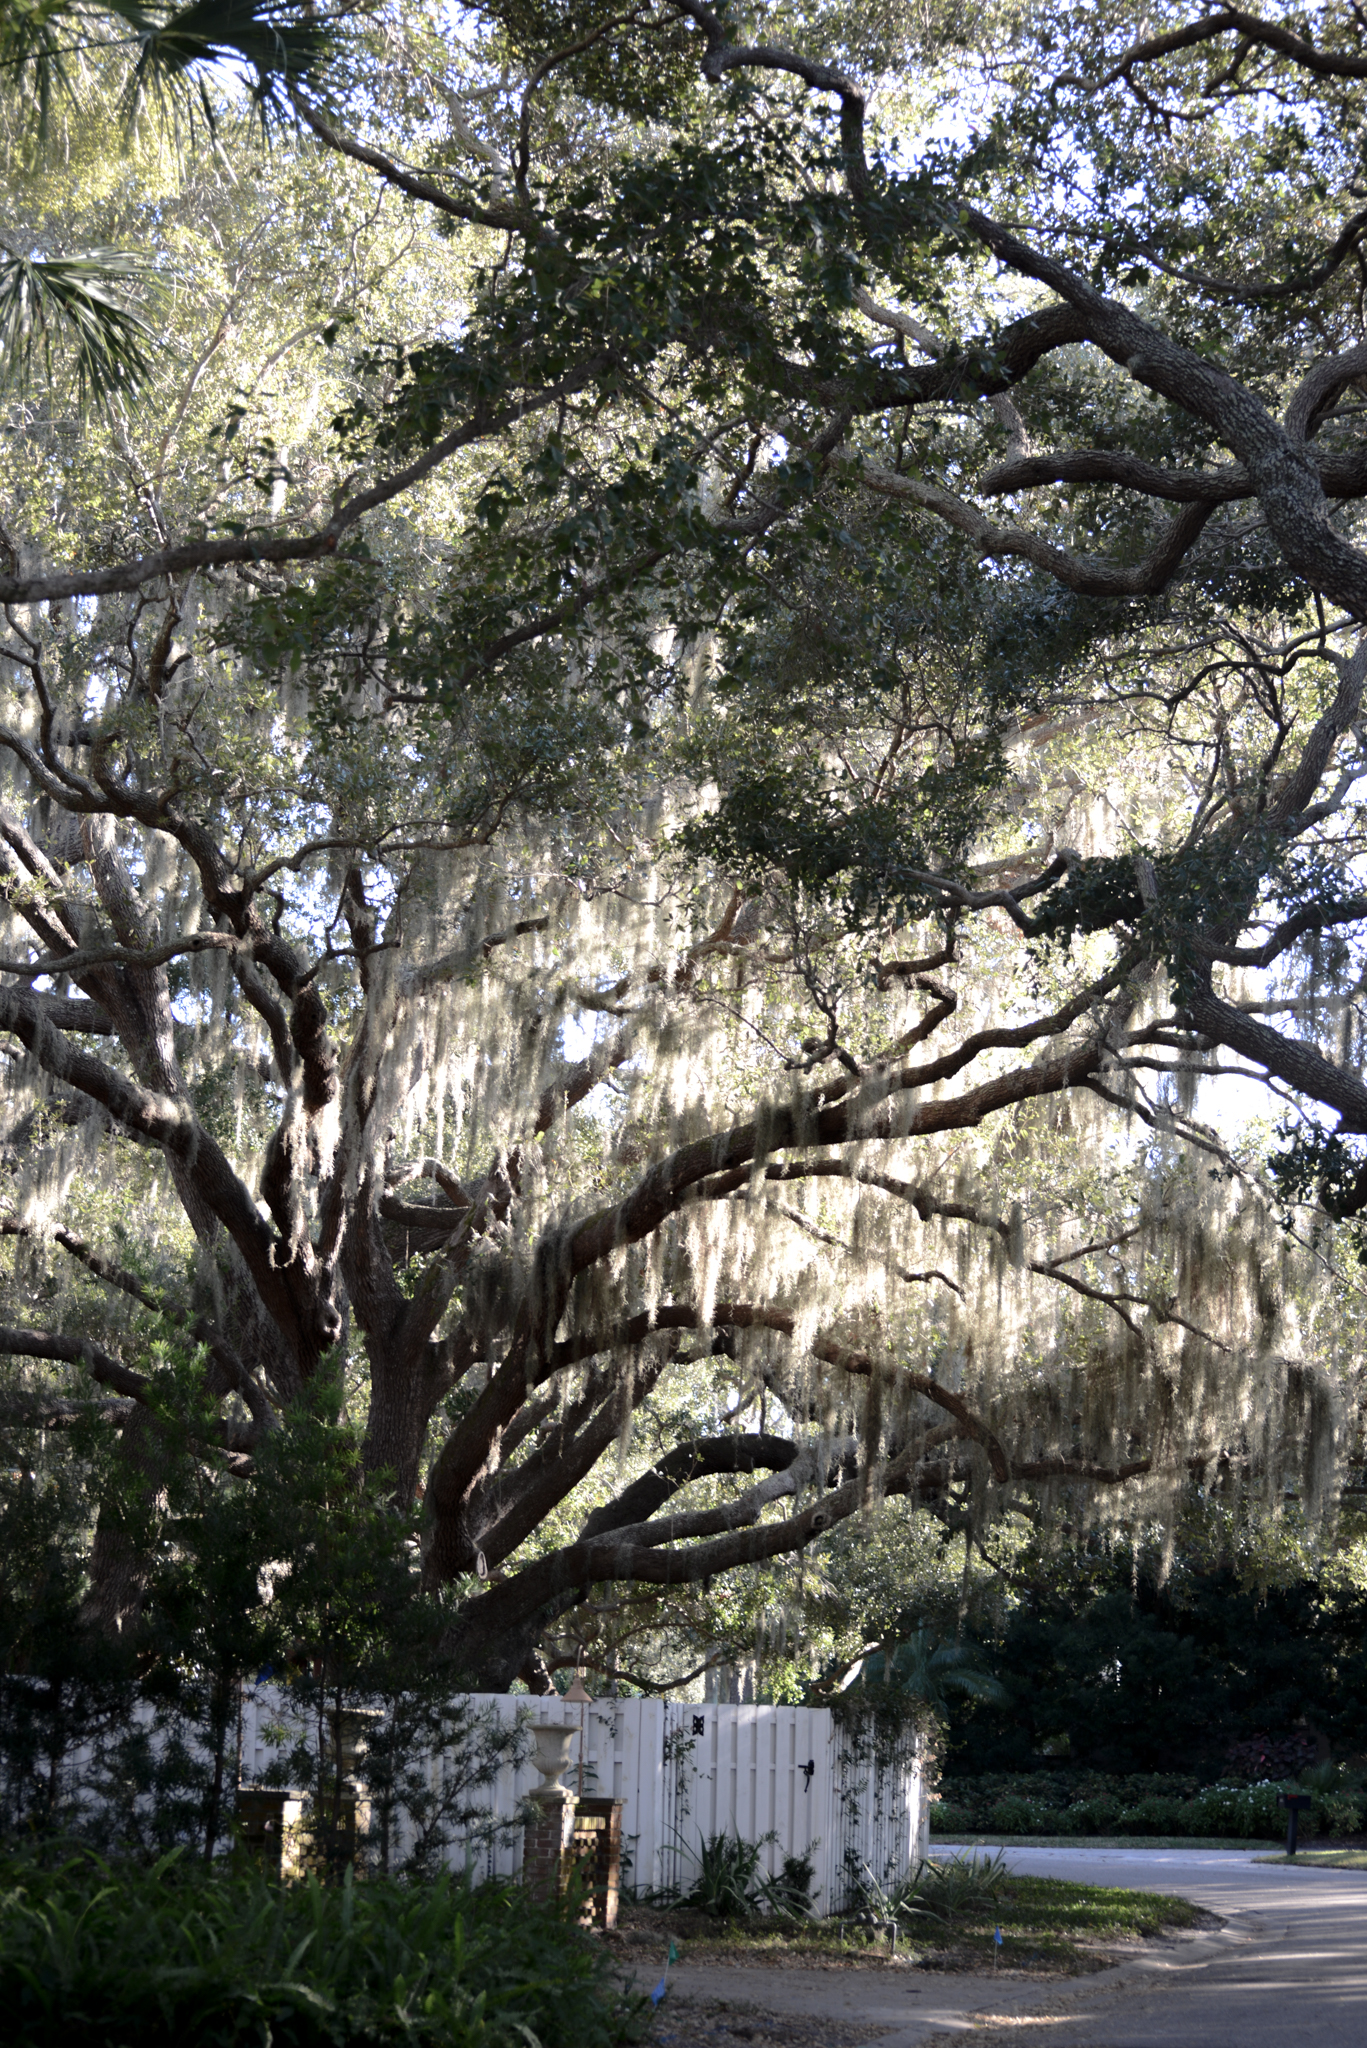 An Arborist Paradise - Walking amongst 100 year old Trees in Florida